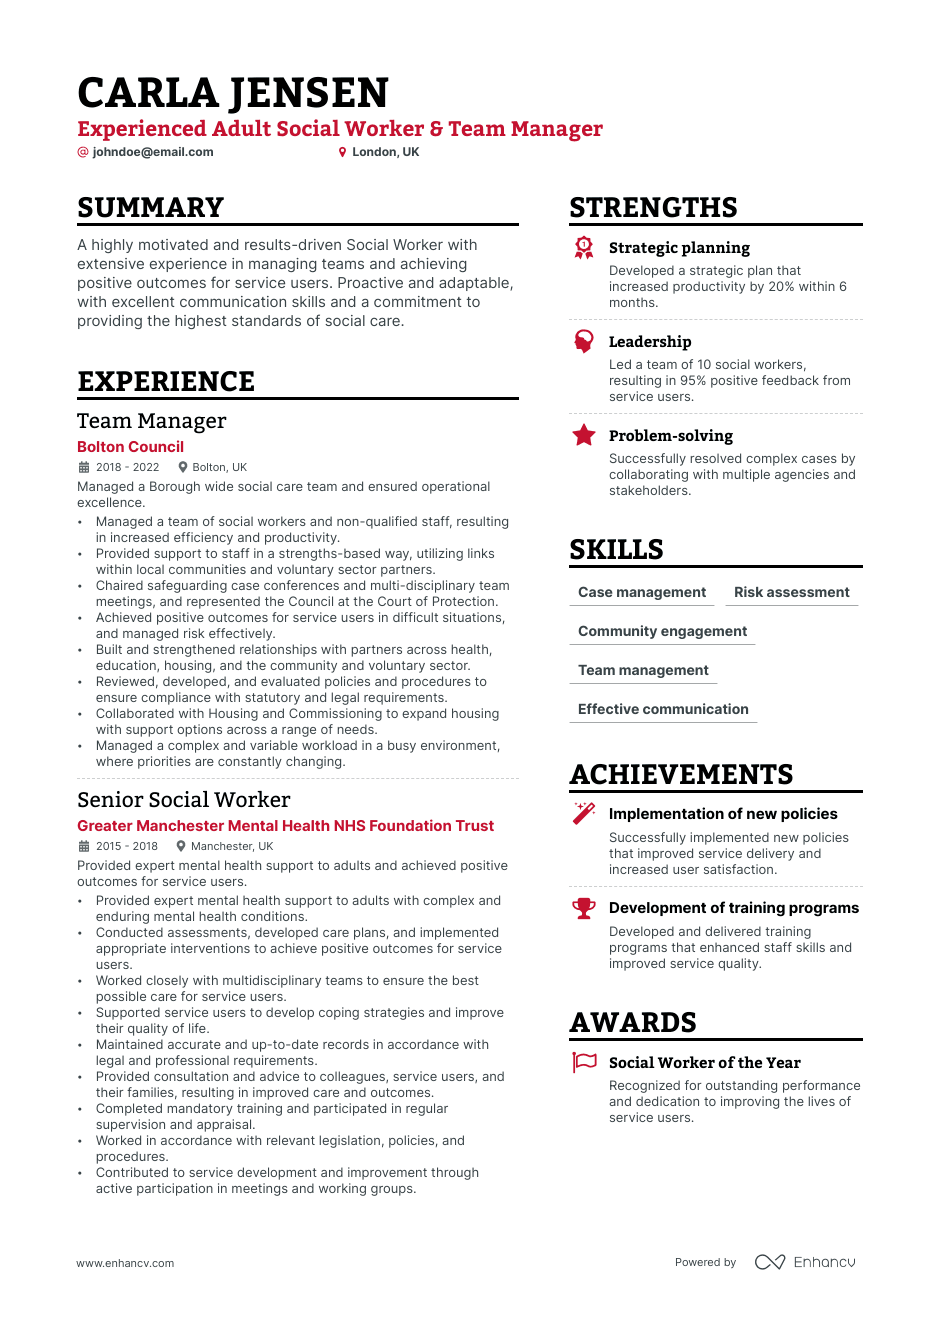 Team Manager resume example